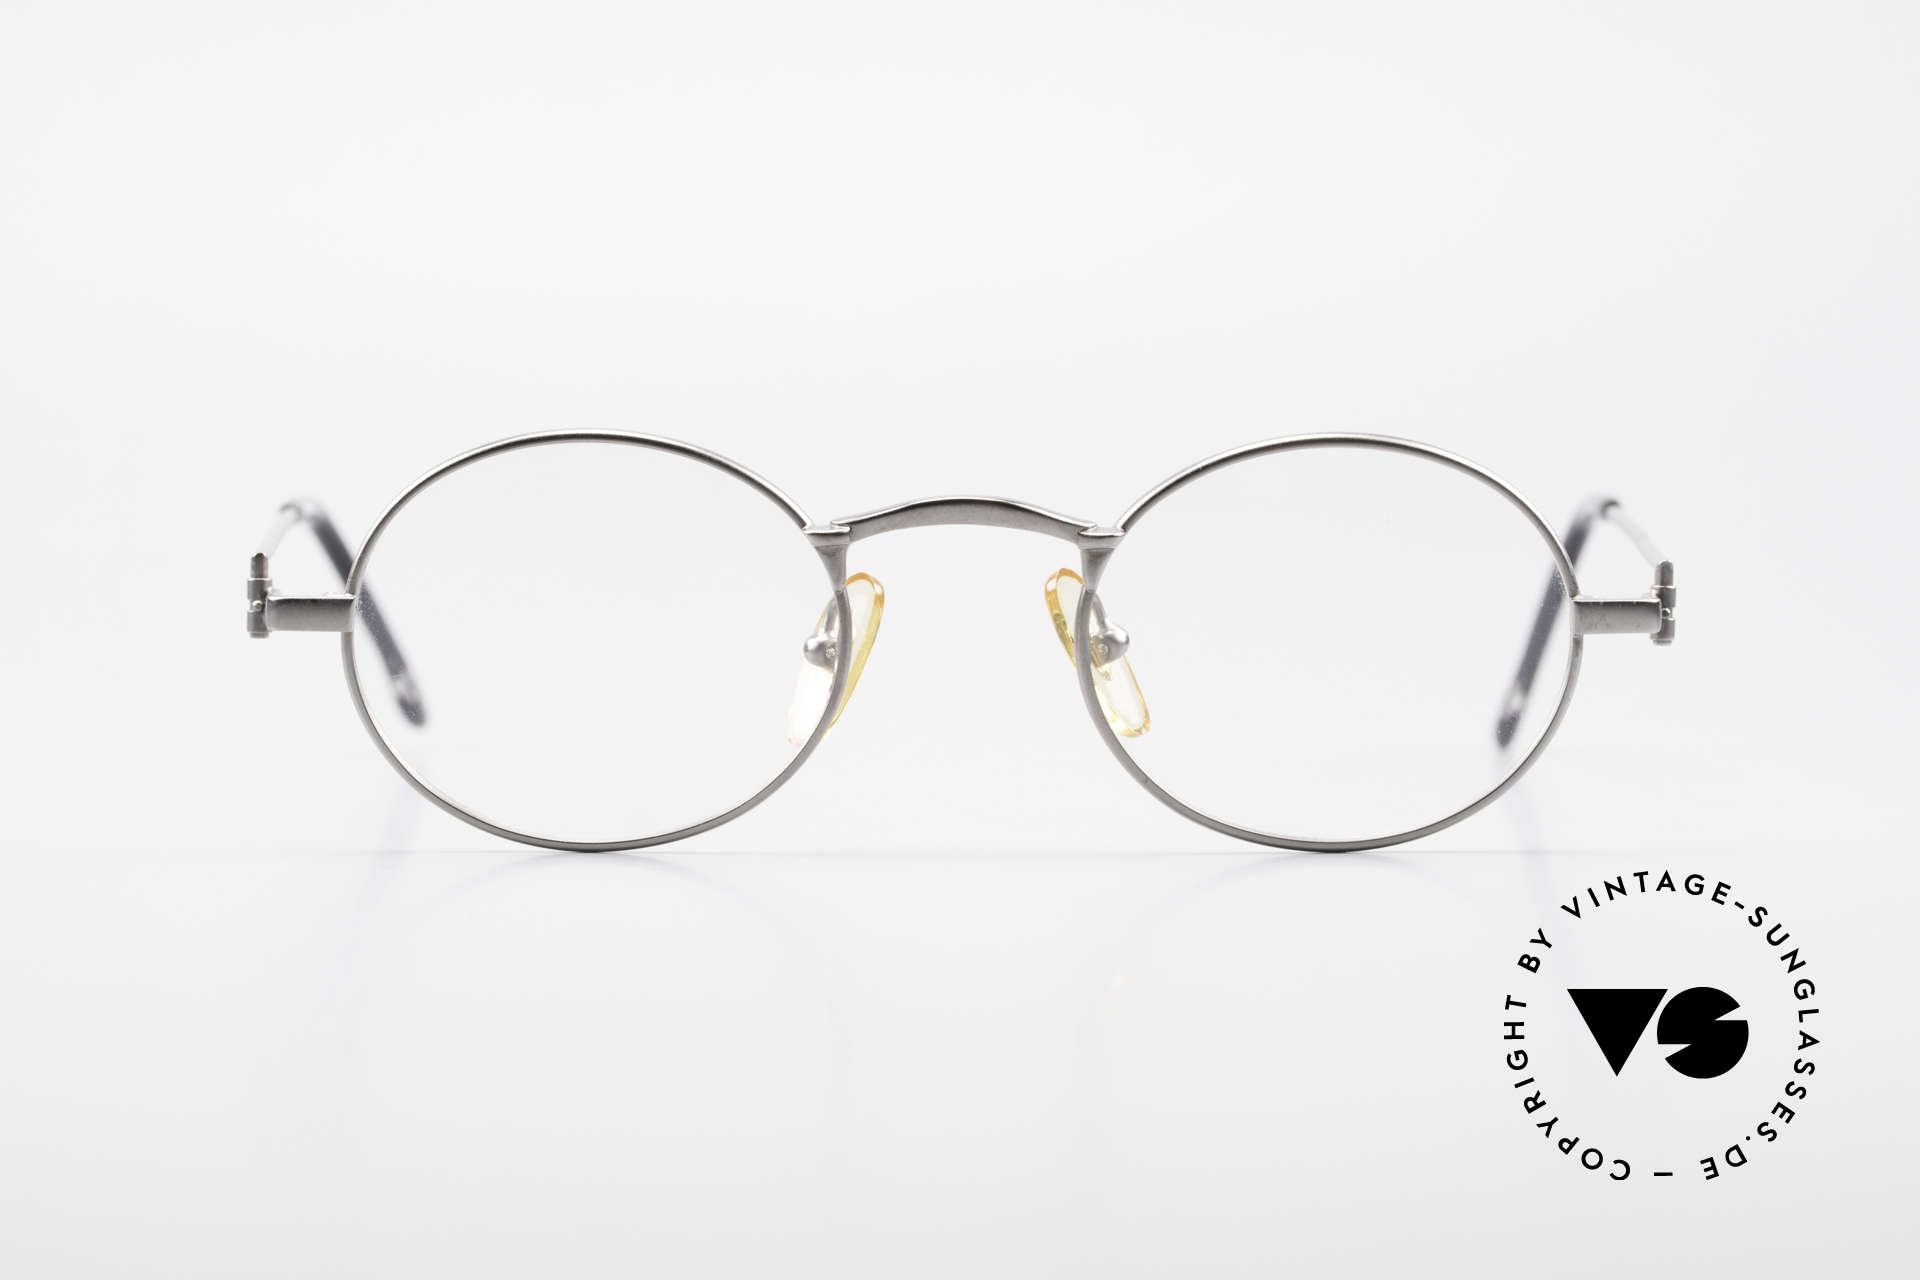 W Proksch's M31/11 Oval Glasses 90's Avantgarde, back then, produced by Wolfgang Proksch himself, Made for Men